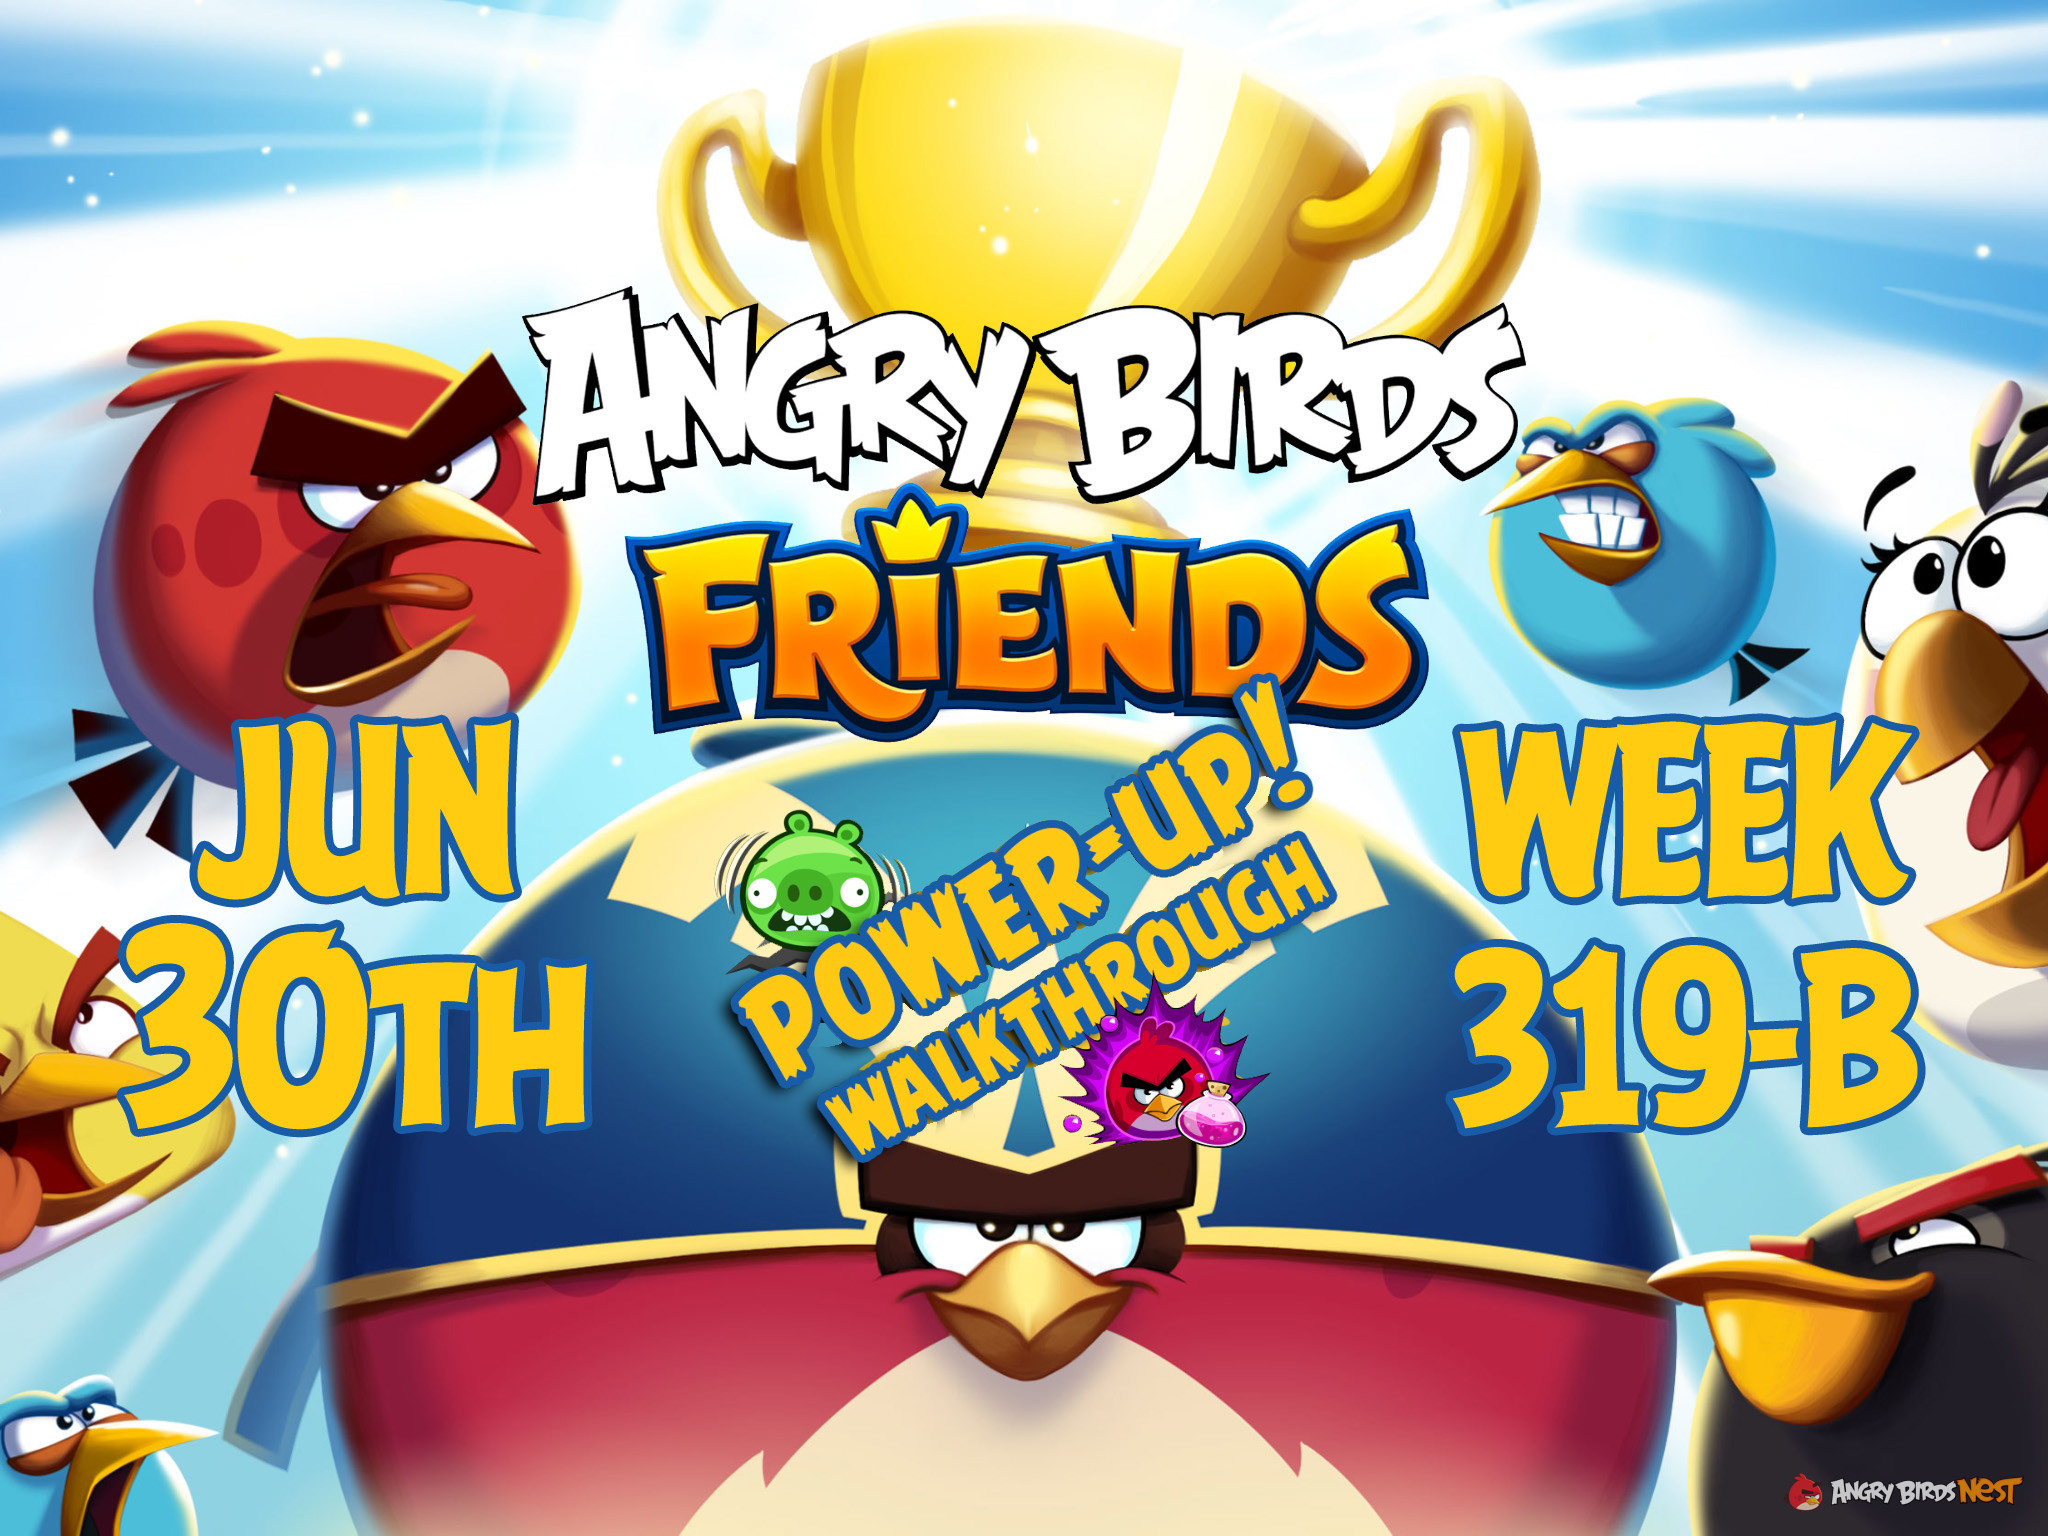 Angry-Birds-Friends-Tournament-Week-319-B-Feature-Image-PU